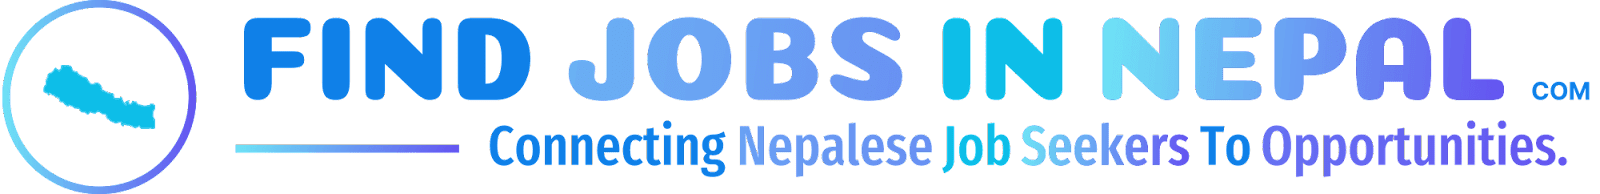 Connecting Nepalese job seekers with diverse global career prospects and job opportunities.